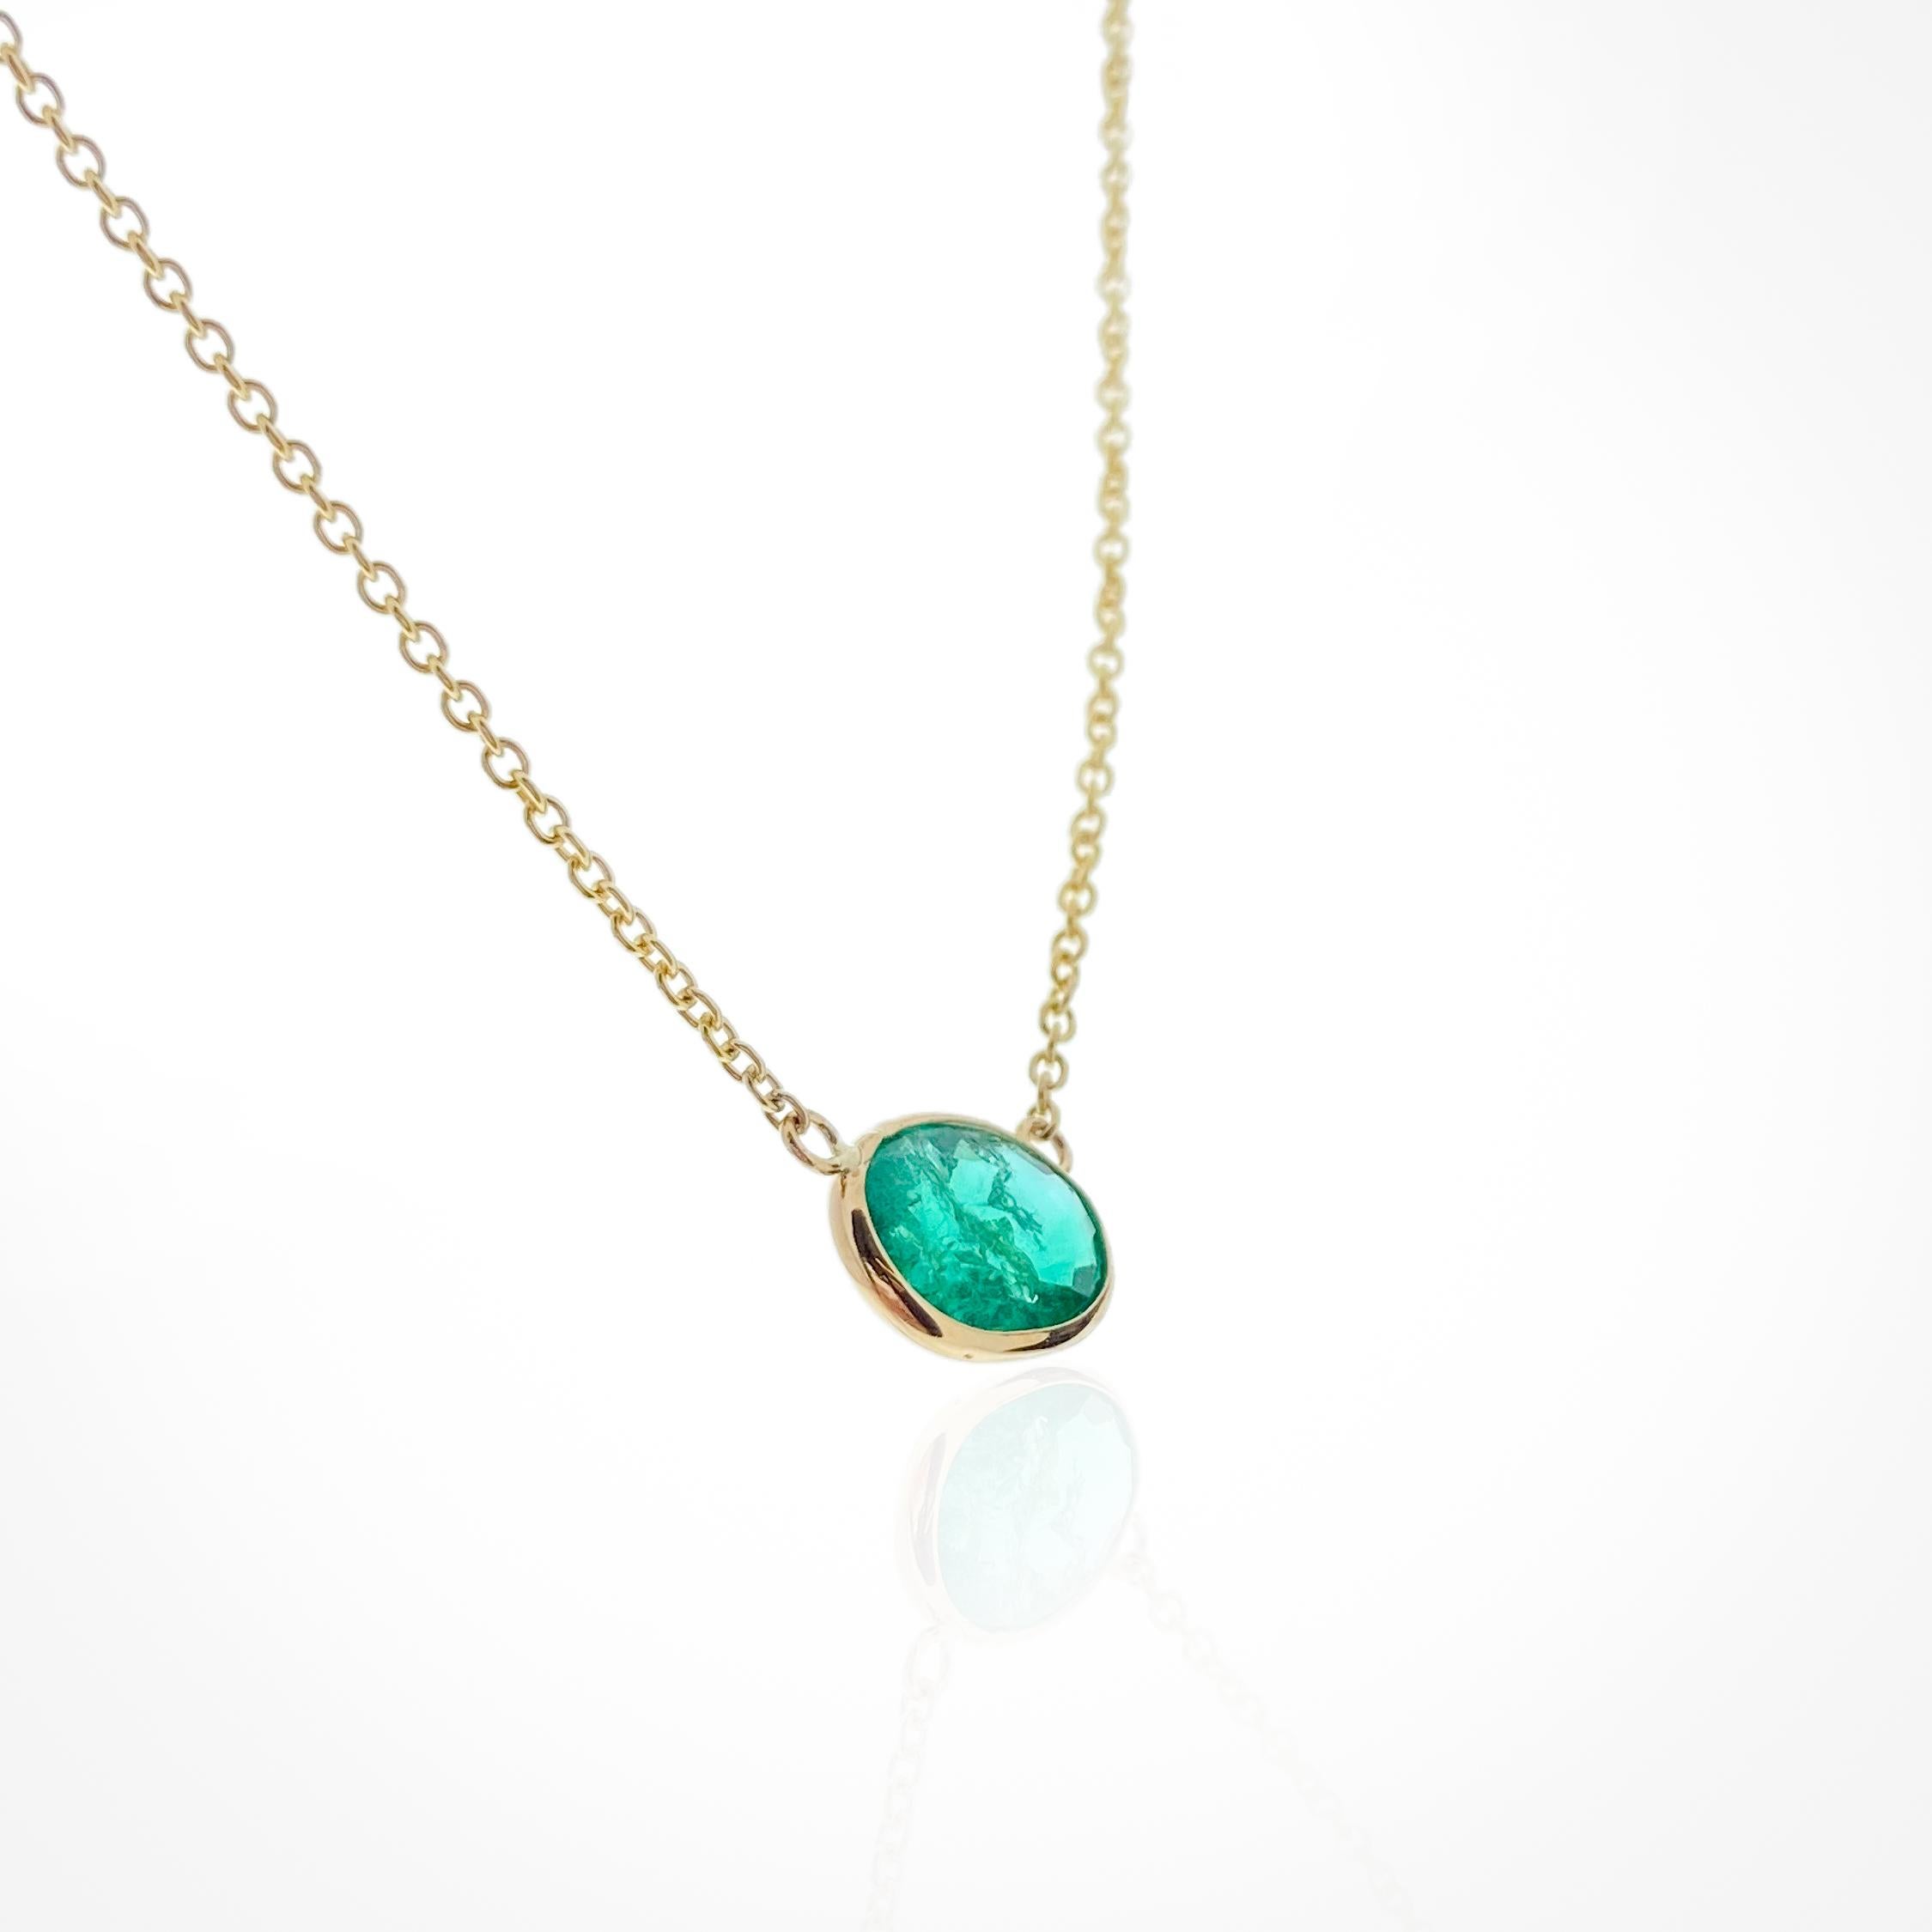 This necklace features an oval-cut green emerald with a weight of 1.61 carats, set in 14k yellow gold (YG). Emeralds are known for their stunning green color, and the oval cut is a classic and elegant choice for gemstones. Necklaces with emeralds